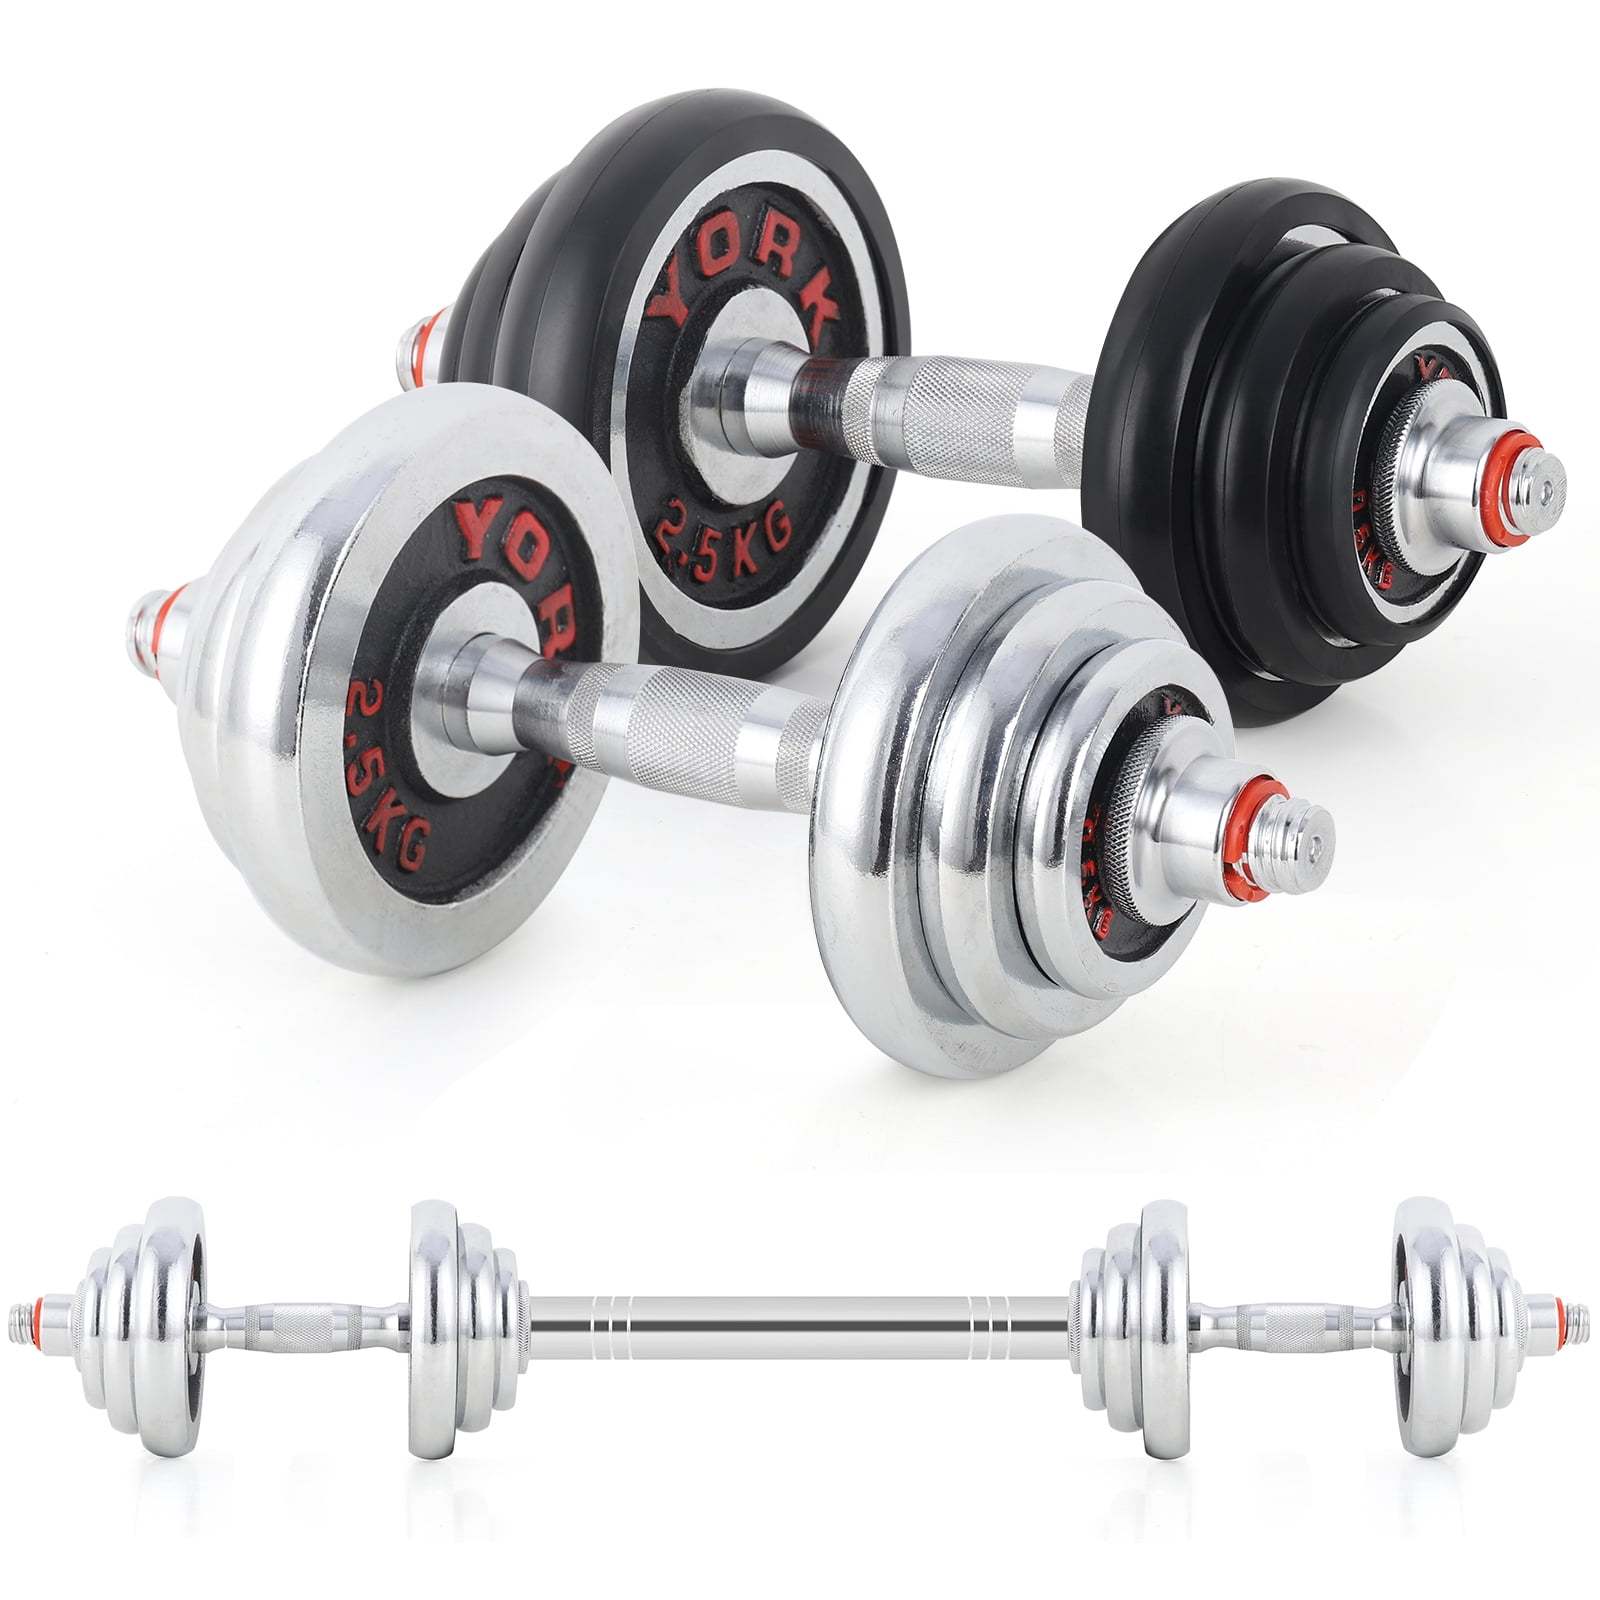 2 in 1 Adjustable Weights Dumbbells Set for Men and Women Free Weights Dumbbells Set with Connecting Rod for Exercise Lifting Workout Bodybuilding Training 2 Pair/Set 